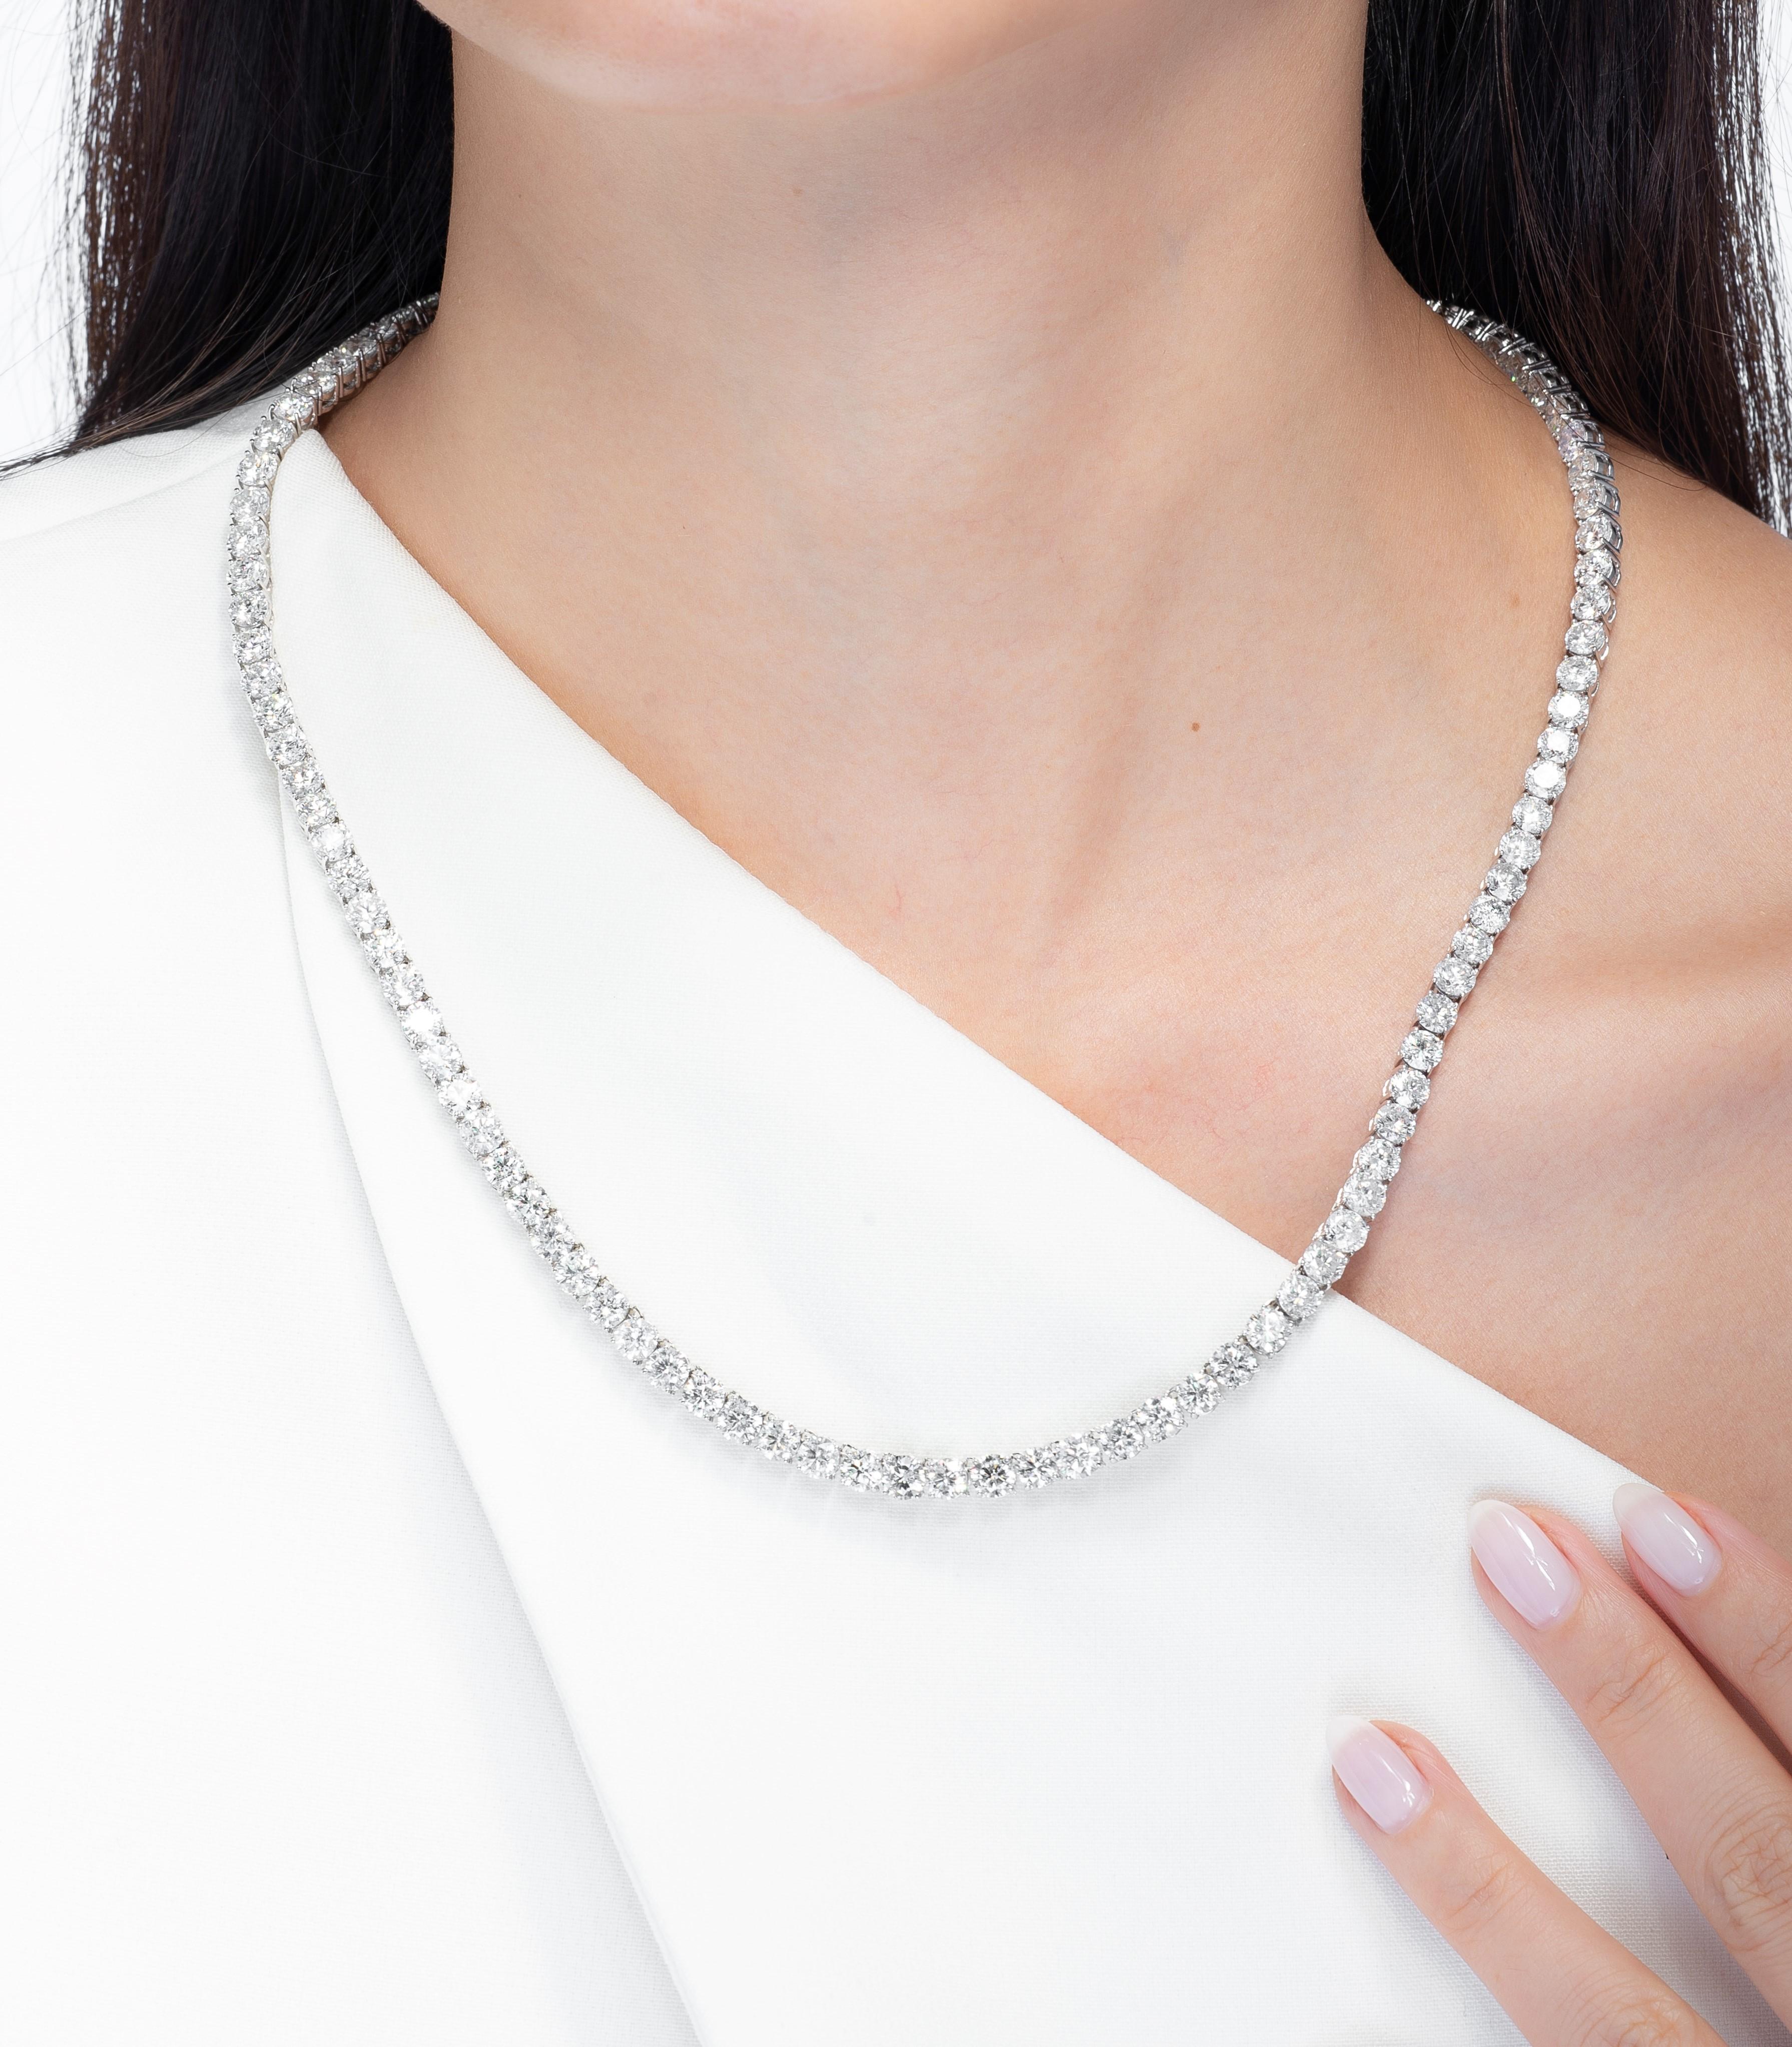 A gorgeous diamond necklace is a staple in everyone's wardrobe! This 45 carat round brilliant white diamond necklace features GH color diamonds in SI1 clarity. There are 108 round diamonds with incredible sparkle, ranging in size from 0.38 carats to